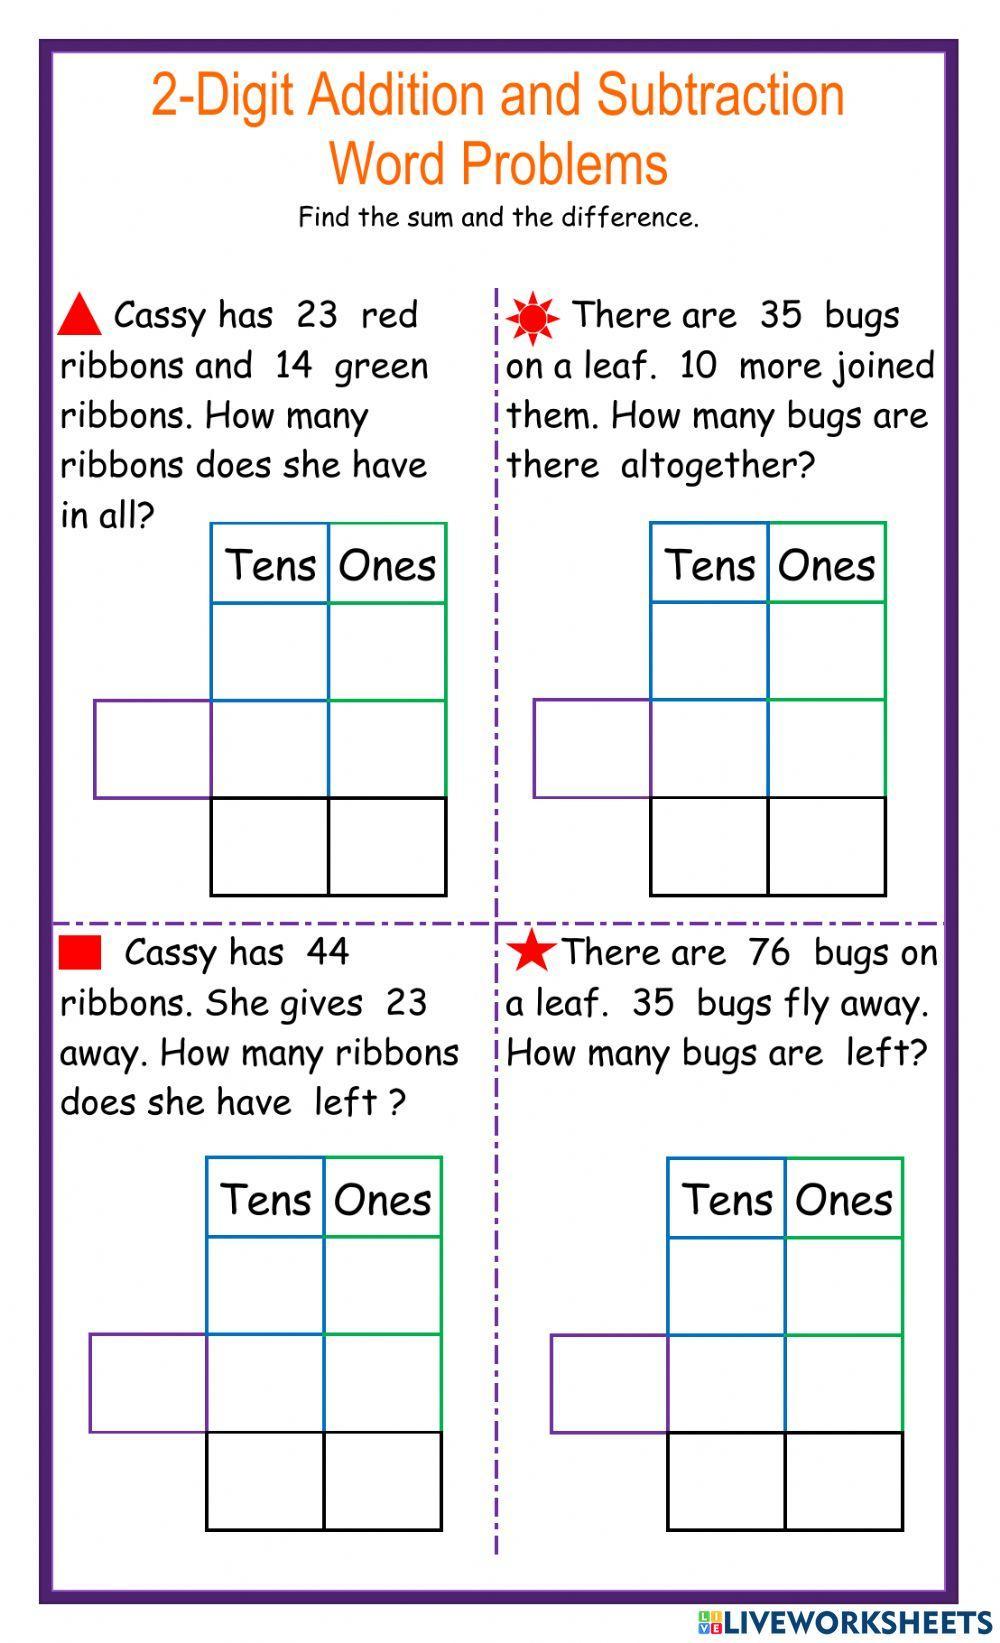 2-Digits Addition and Subtraction Word Problems